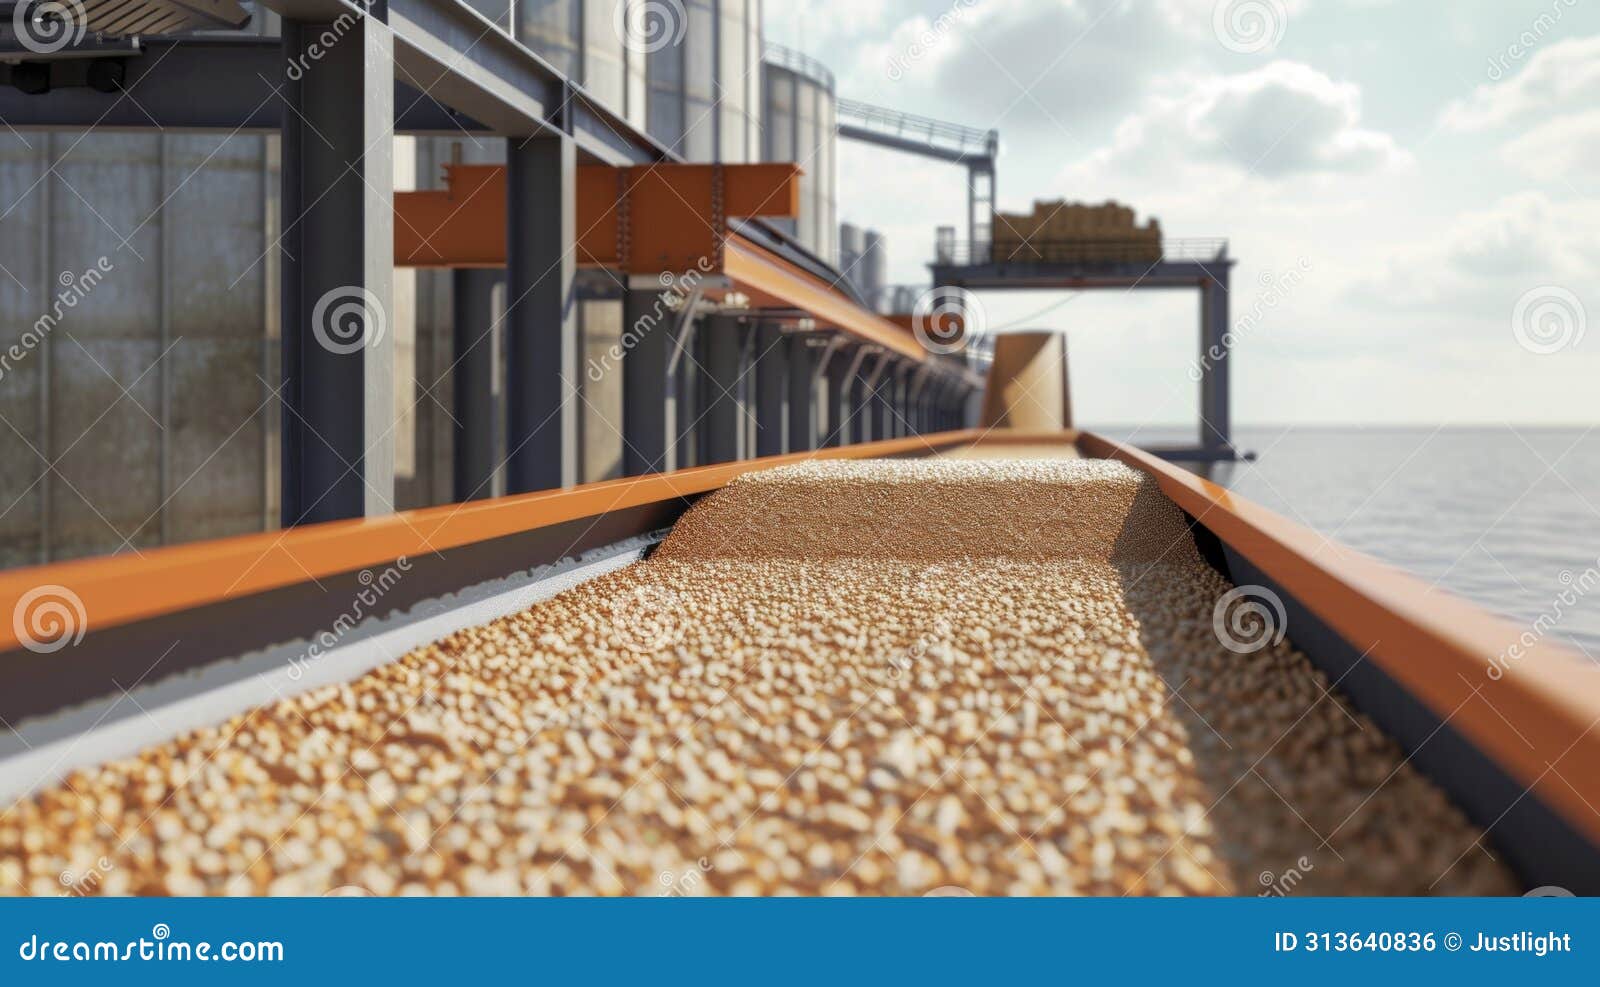 a heavyduty conveyor belt system is shown in action easily and swiftly transporting grains from dock to ship with